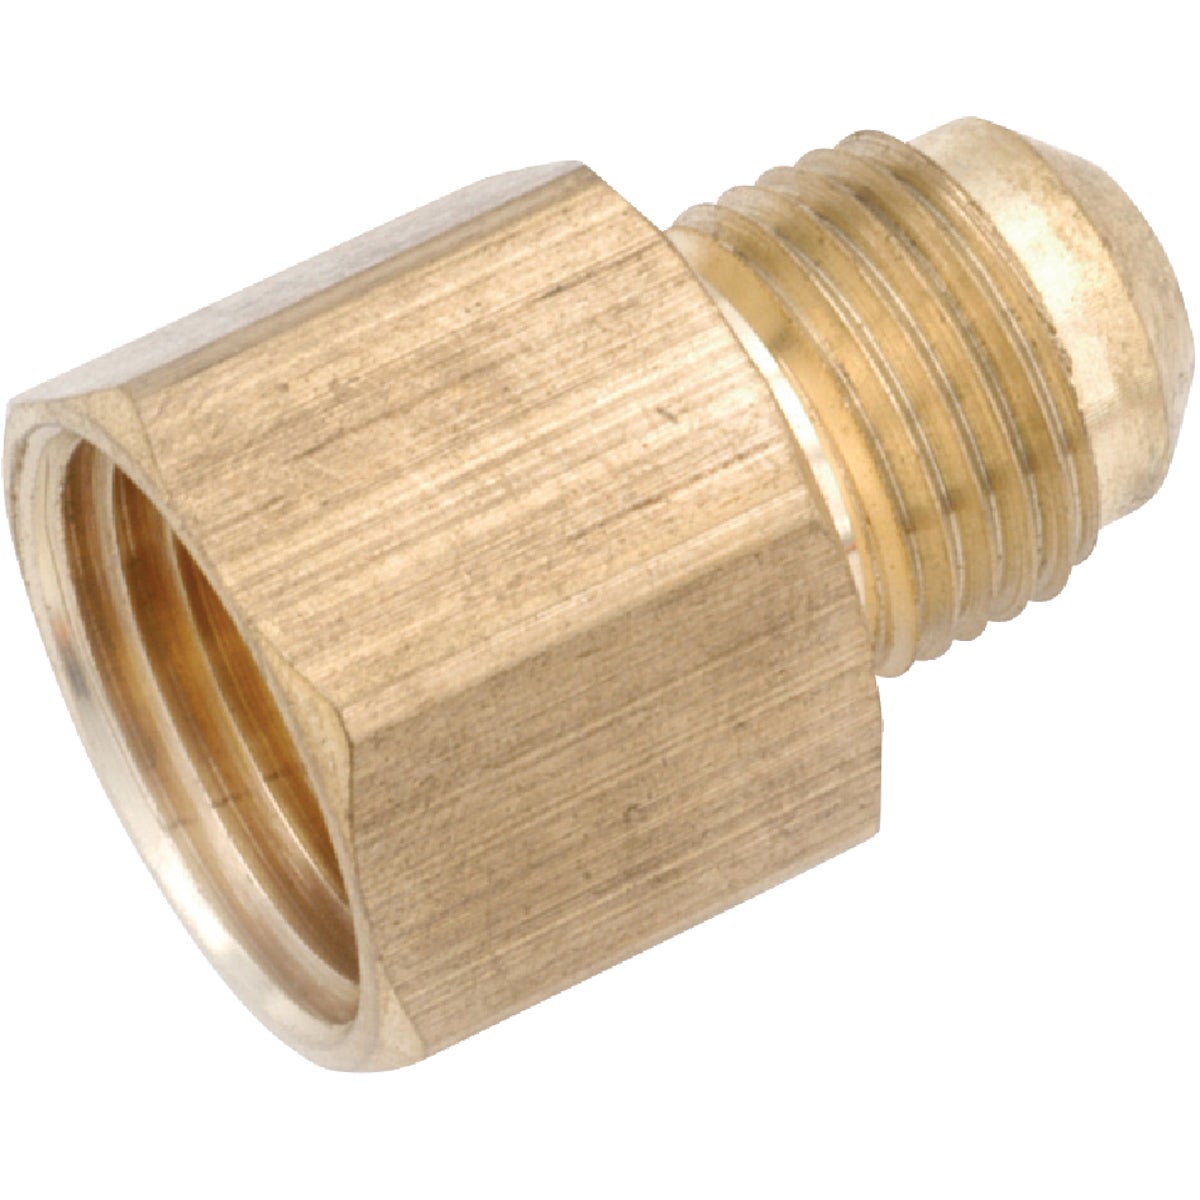 Anderson Metals 3/8 In. x 1/4 In. Brass Low Lead Female Flare Connector